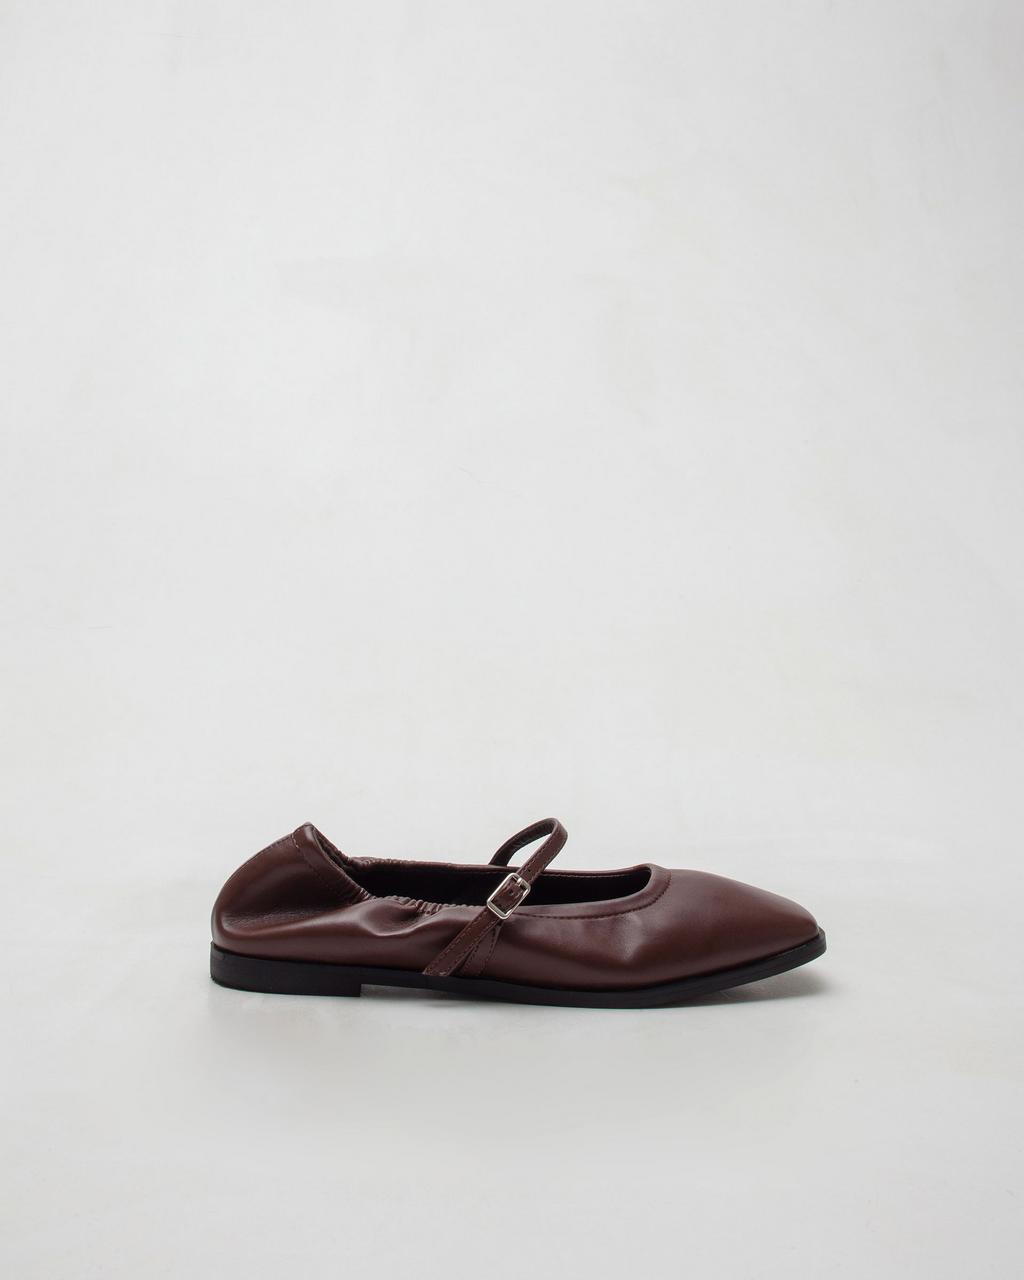 Tagtraume Lily-004 - Brown(브라운)